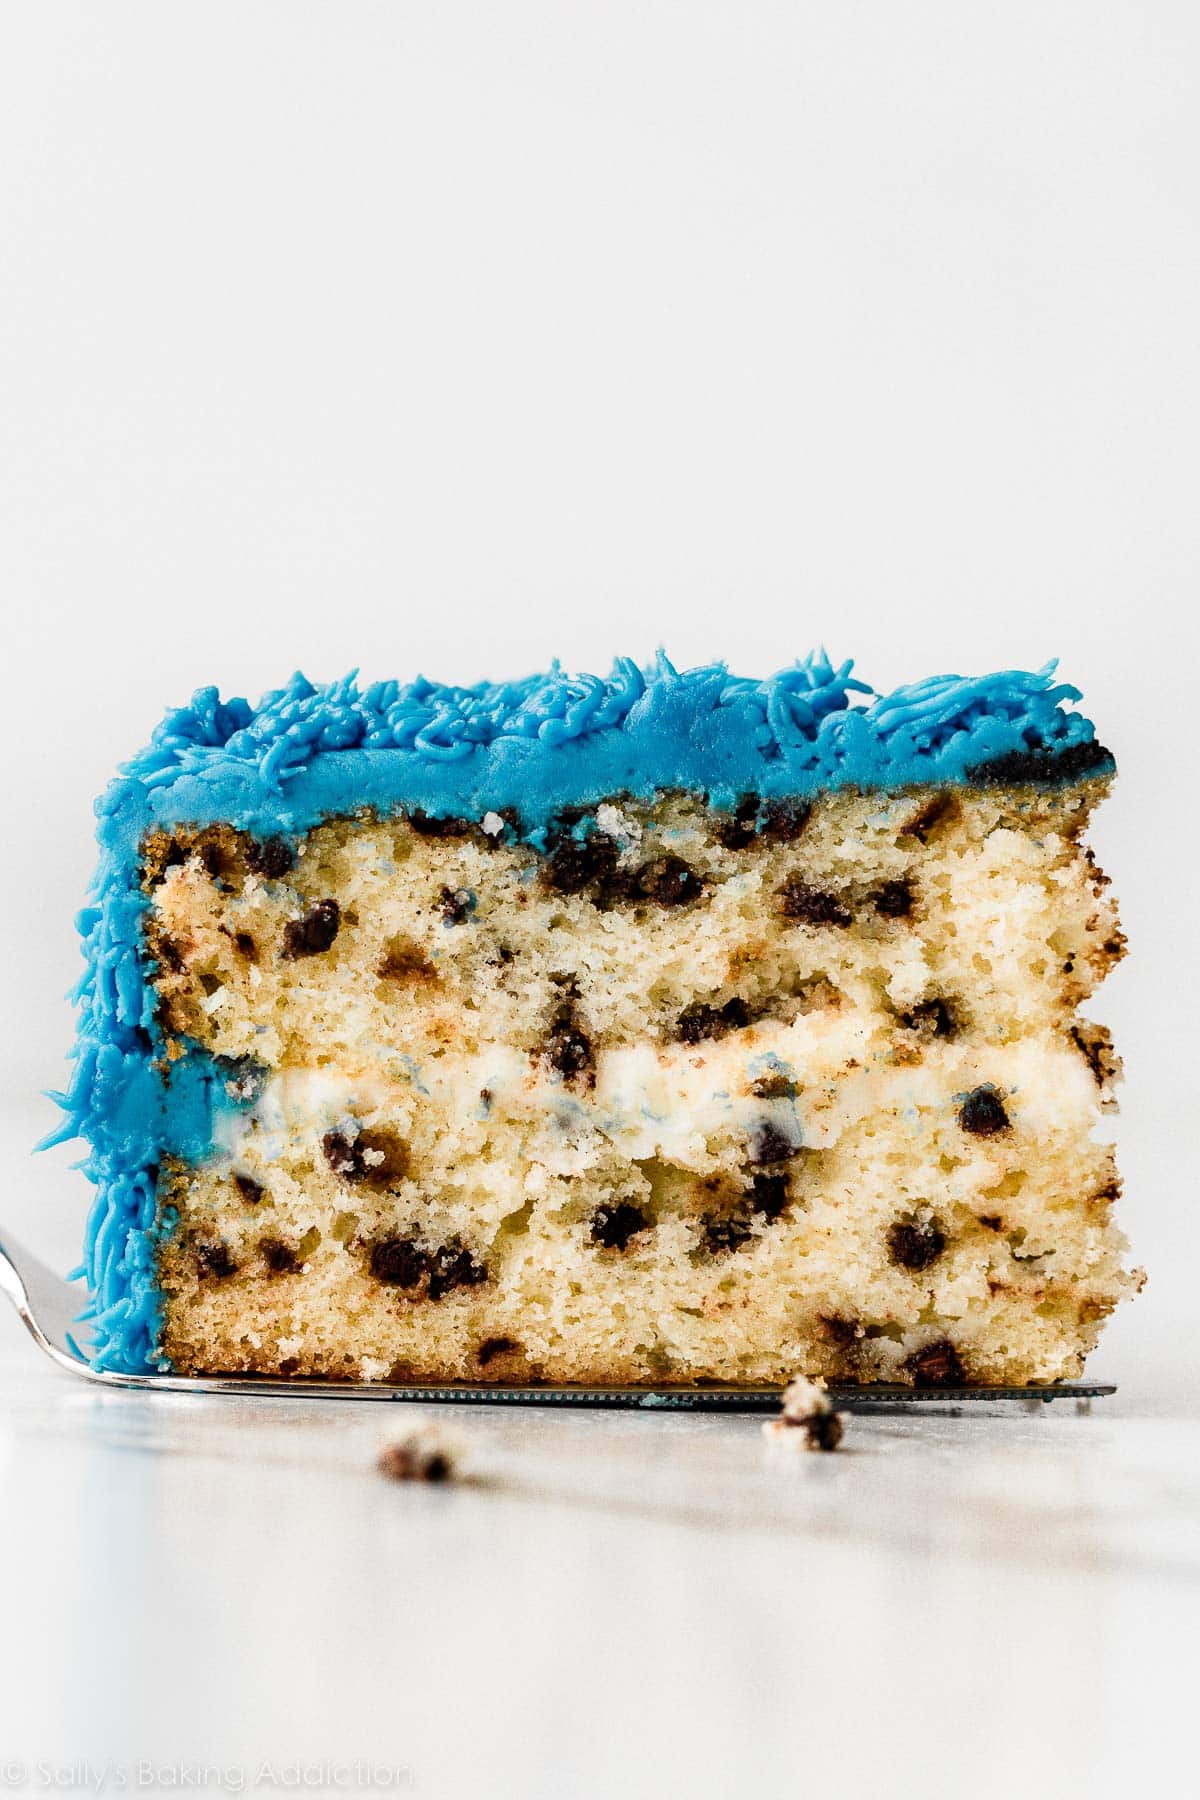 chocolate chip layer cake with blue frosting.